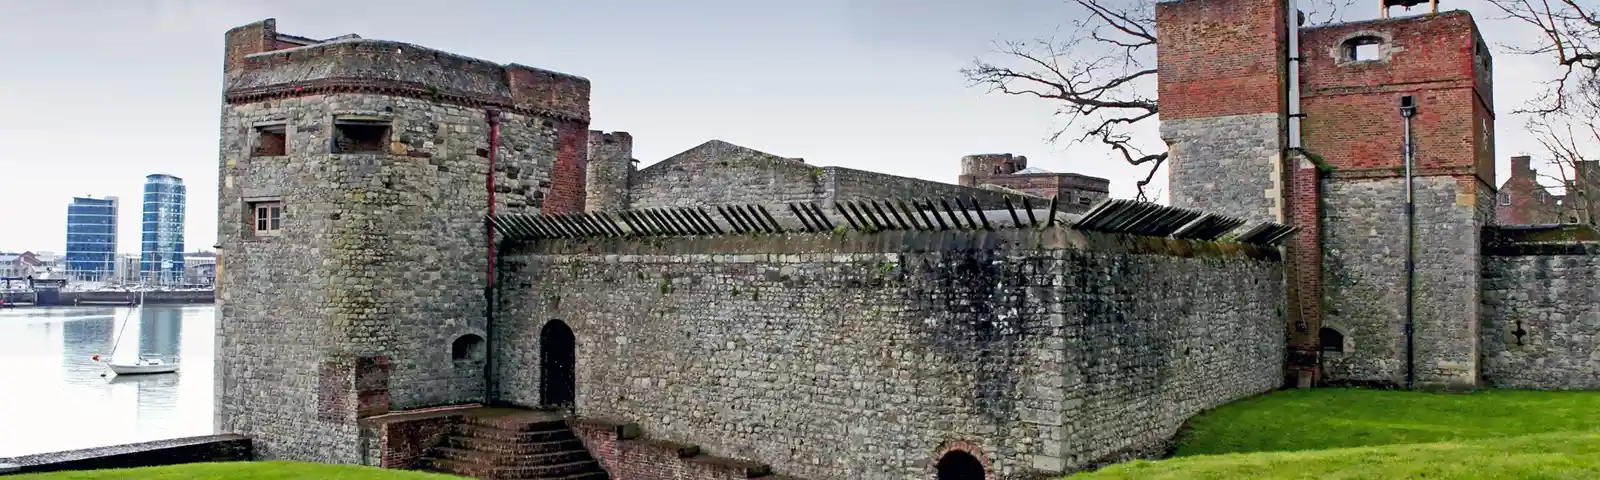 Upnor_Castle_with gardens.jpg